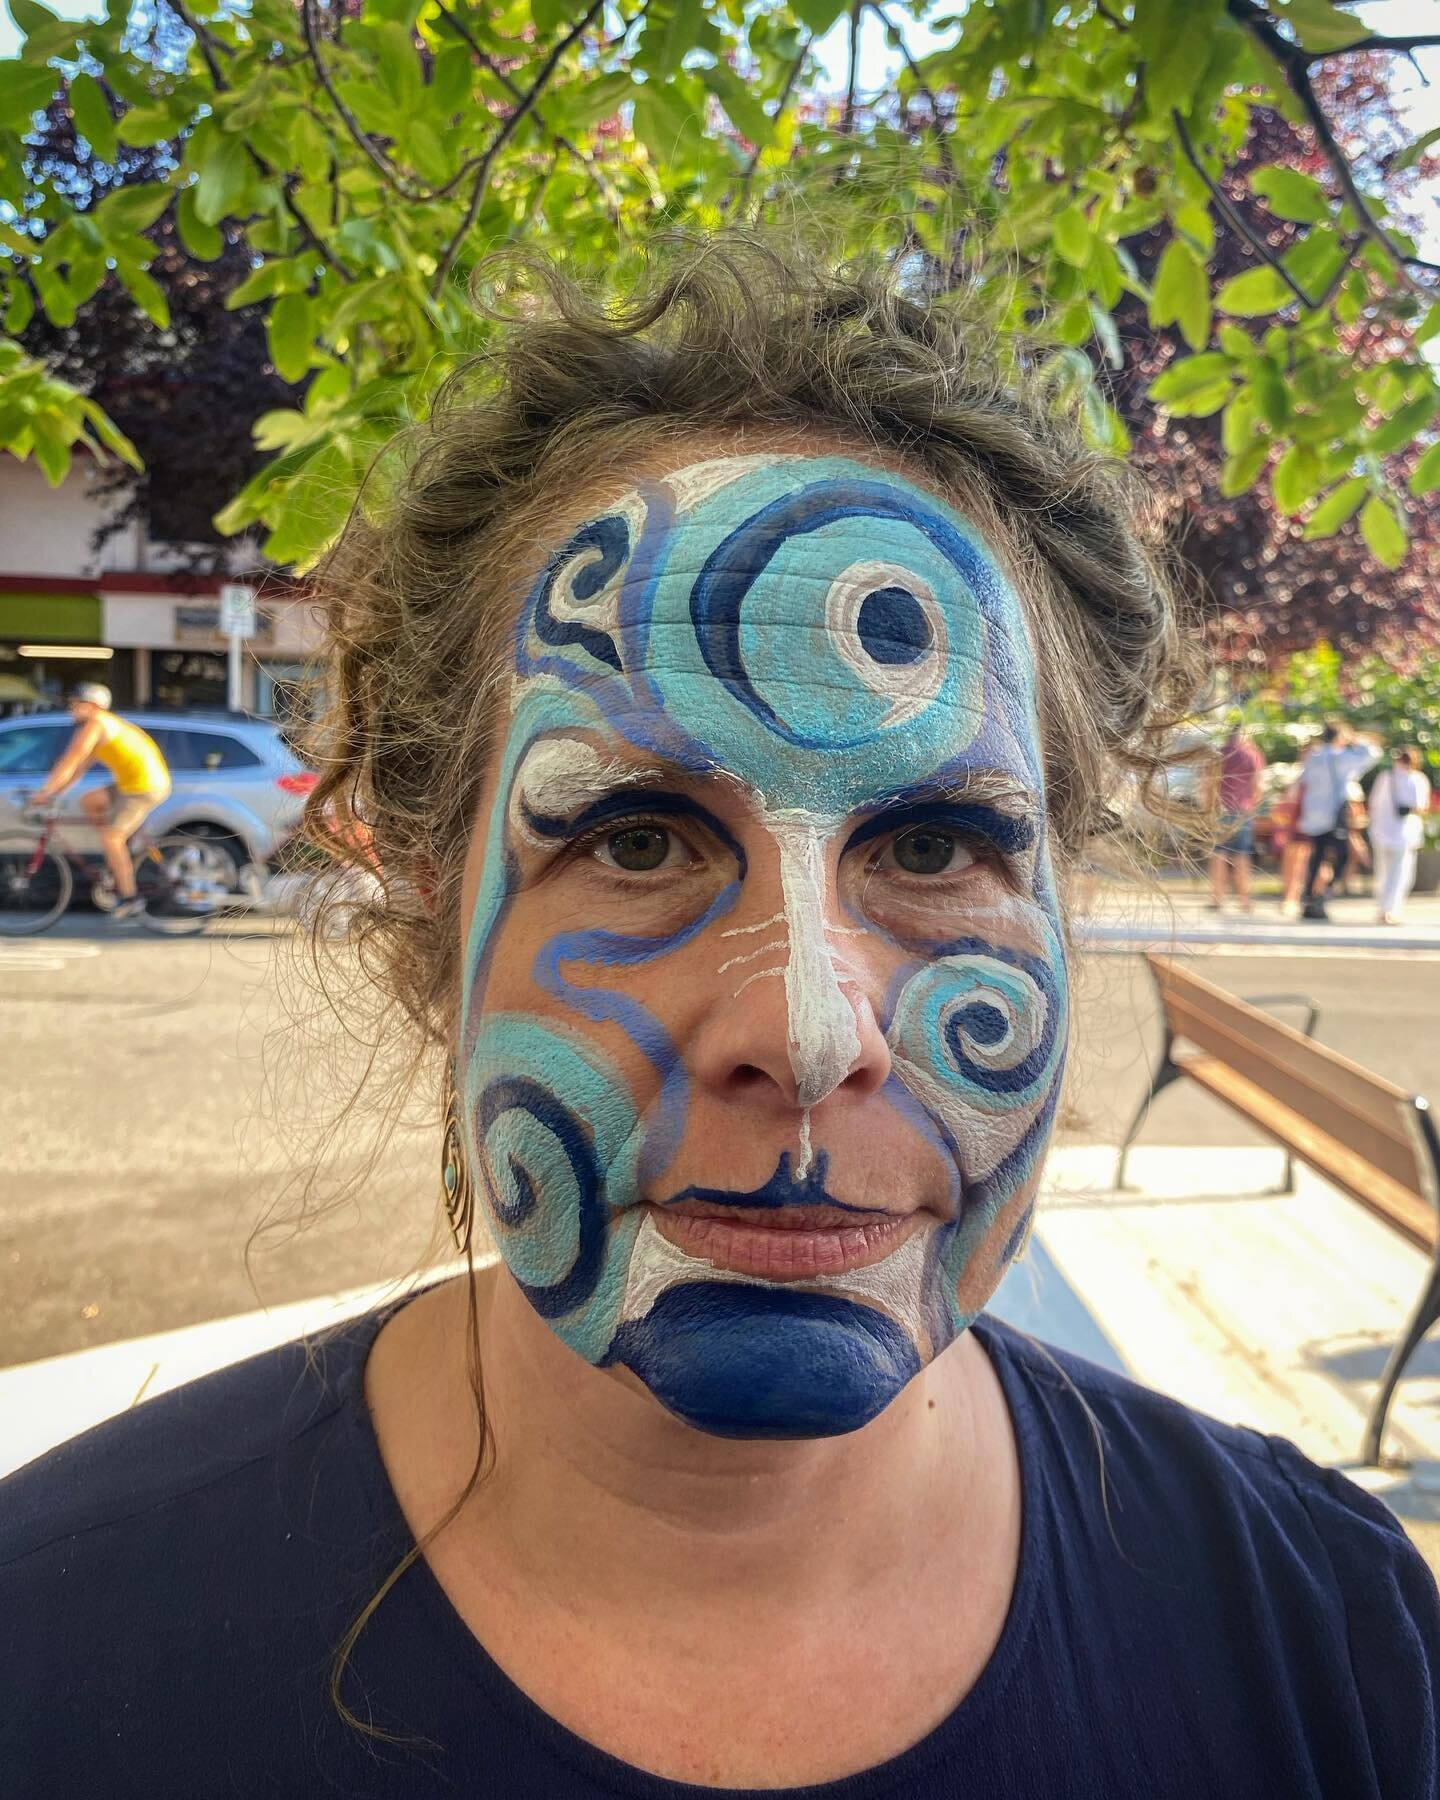 Second go round painting faces at Fernwood Makers  Summer Nights Market. Last month there was an animal vibe going on, last night it was flowers and butterflies.  The kids are all so sweet, patient, and fun.  When they see what they look like and exc